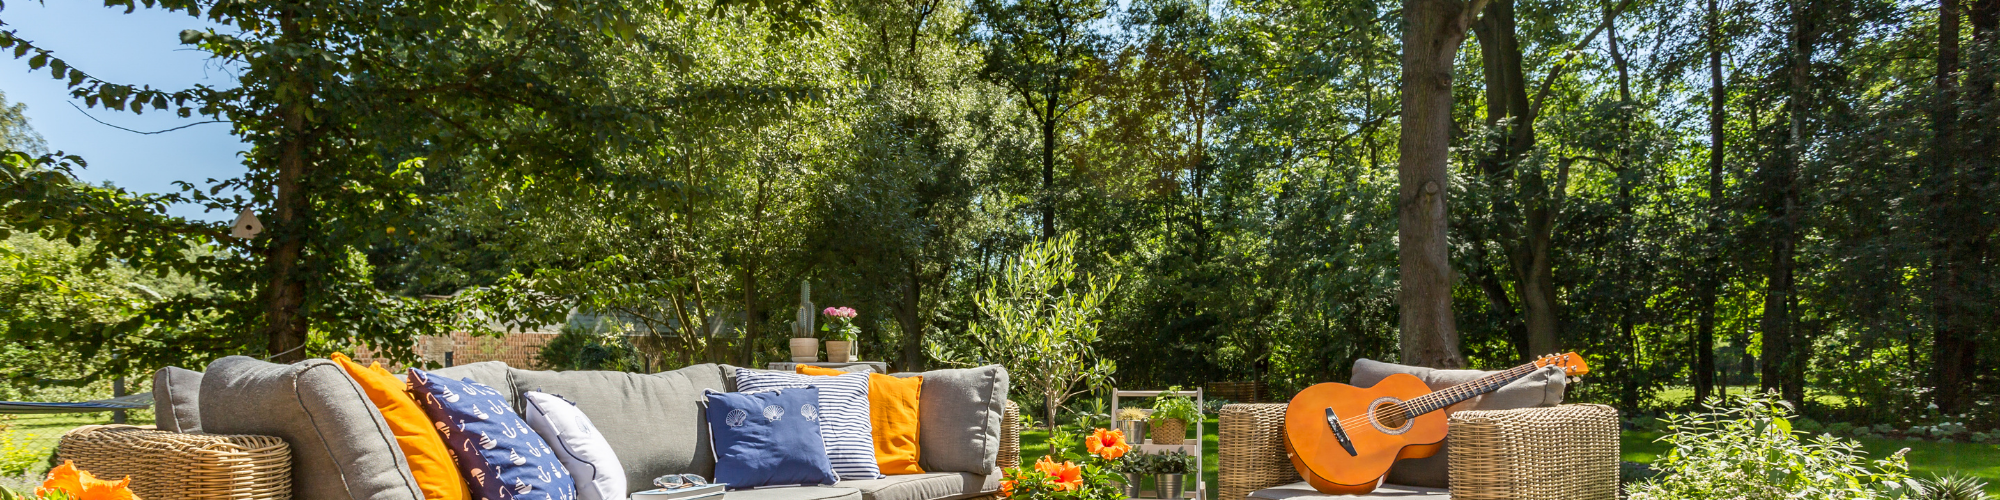 Outdoor patio with furniture, bright pillows and large backyard